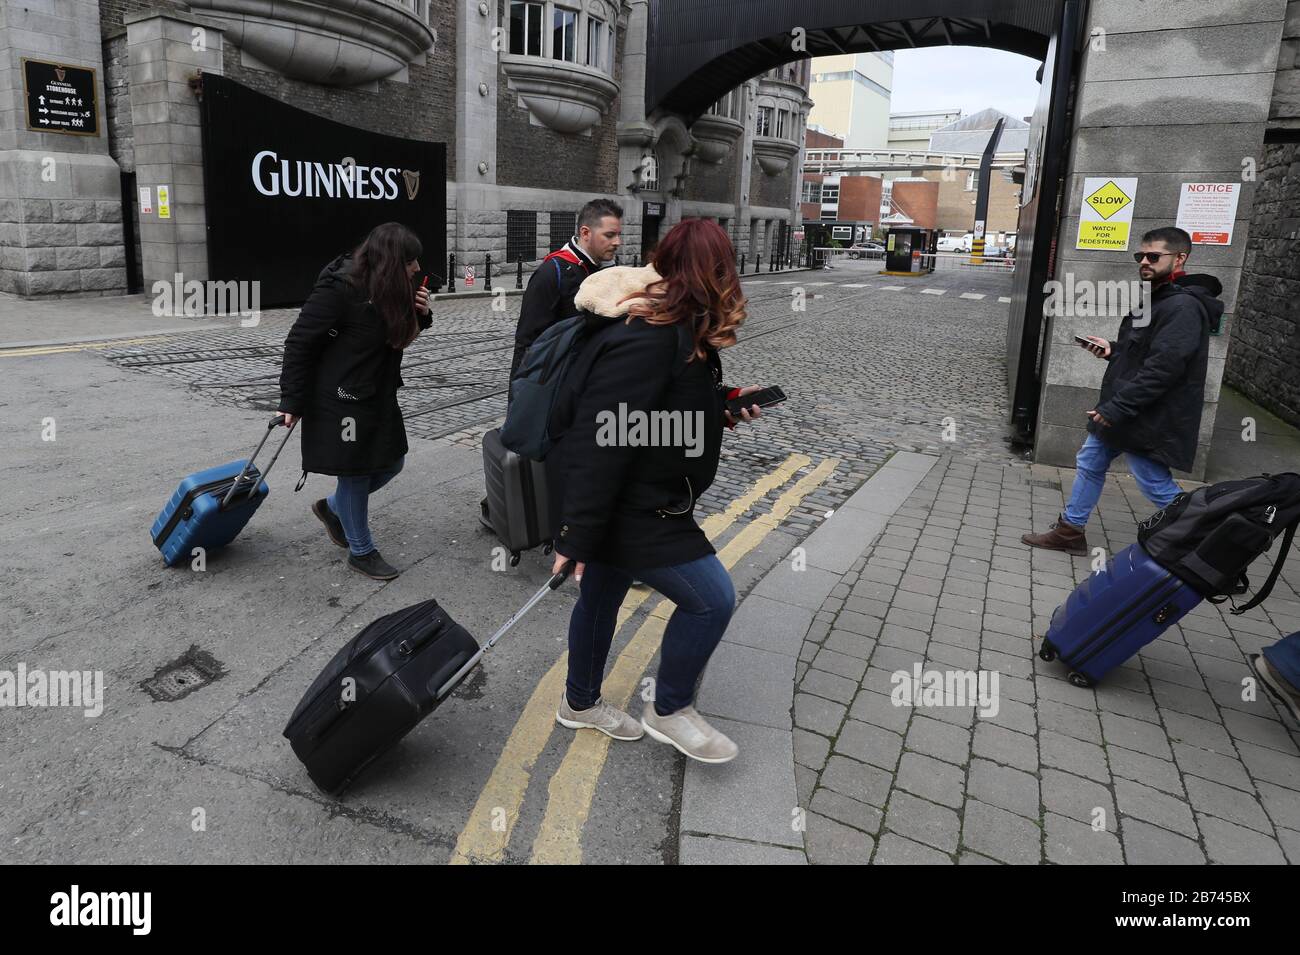 Tourists pass the entrance to the Guinness Storehouse, Dublin, which has been closed to visitors, in line with government recommendations, to help prevent the spread of coronavirus. Stock Photo